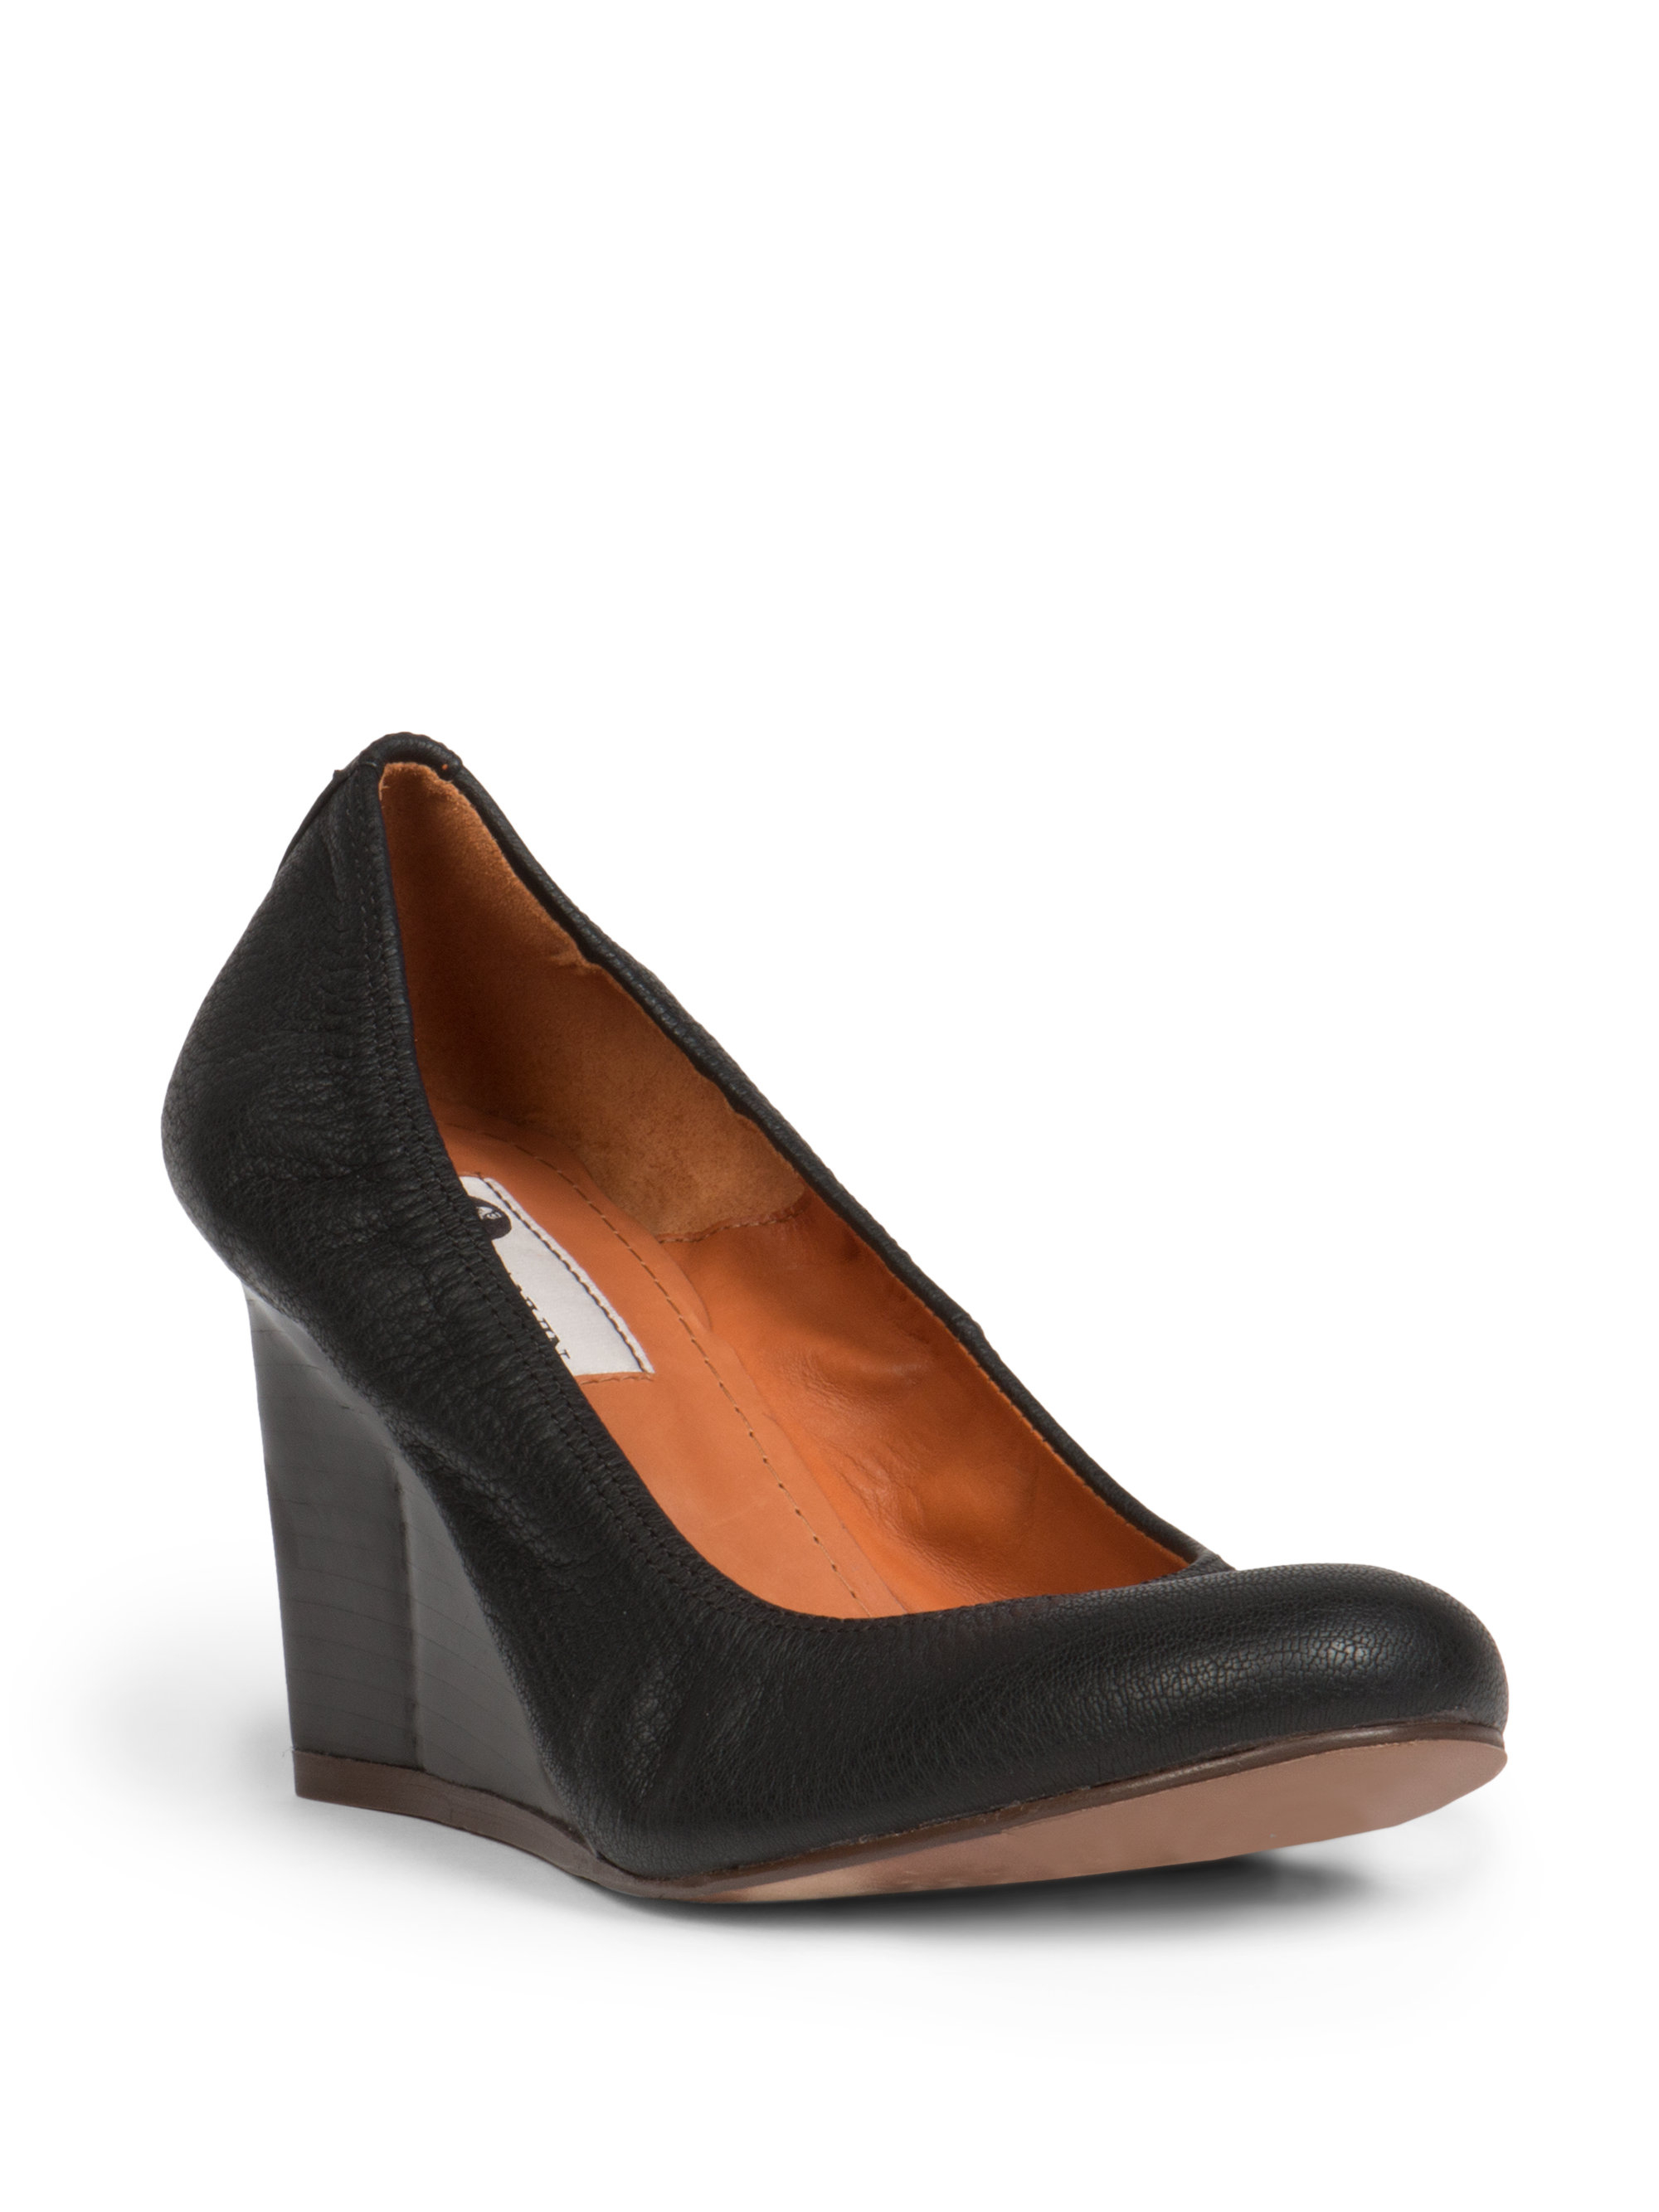 Lanvin Leather Wedge Pumps in Black | Lyst